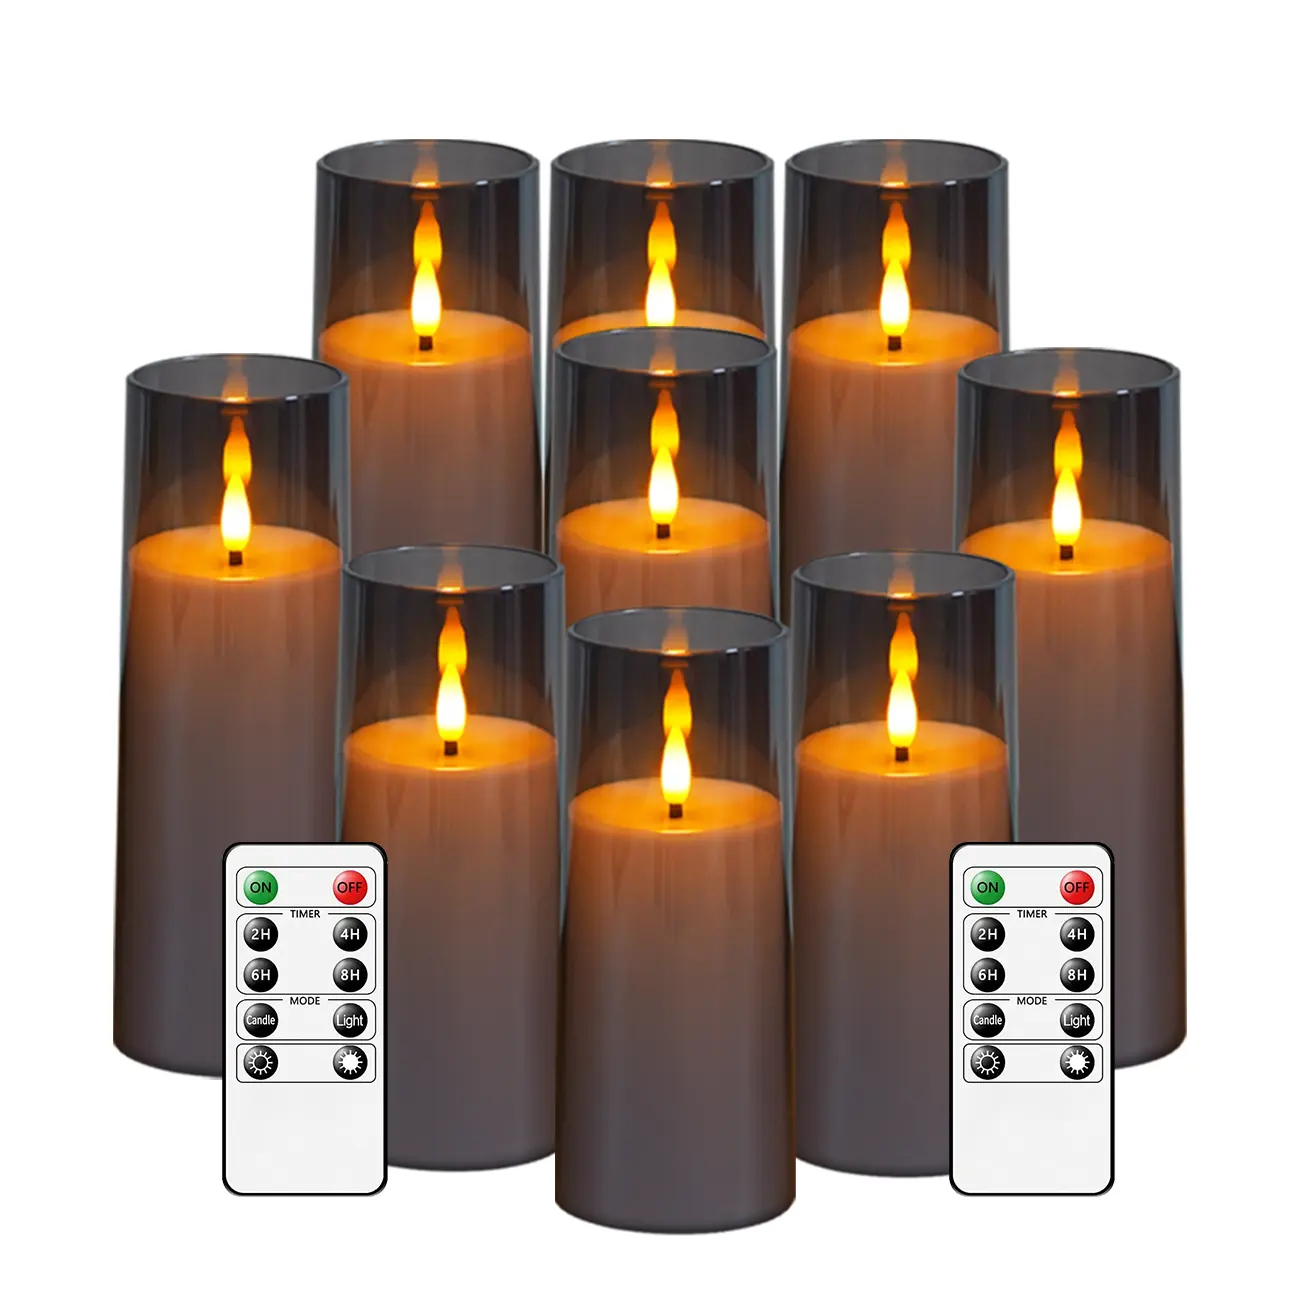 Grey candles set with remote control classic style replaced wick high end pray Led candle light